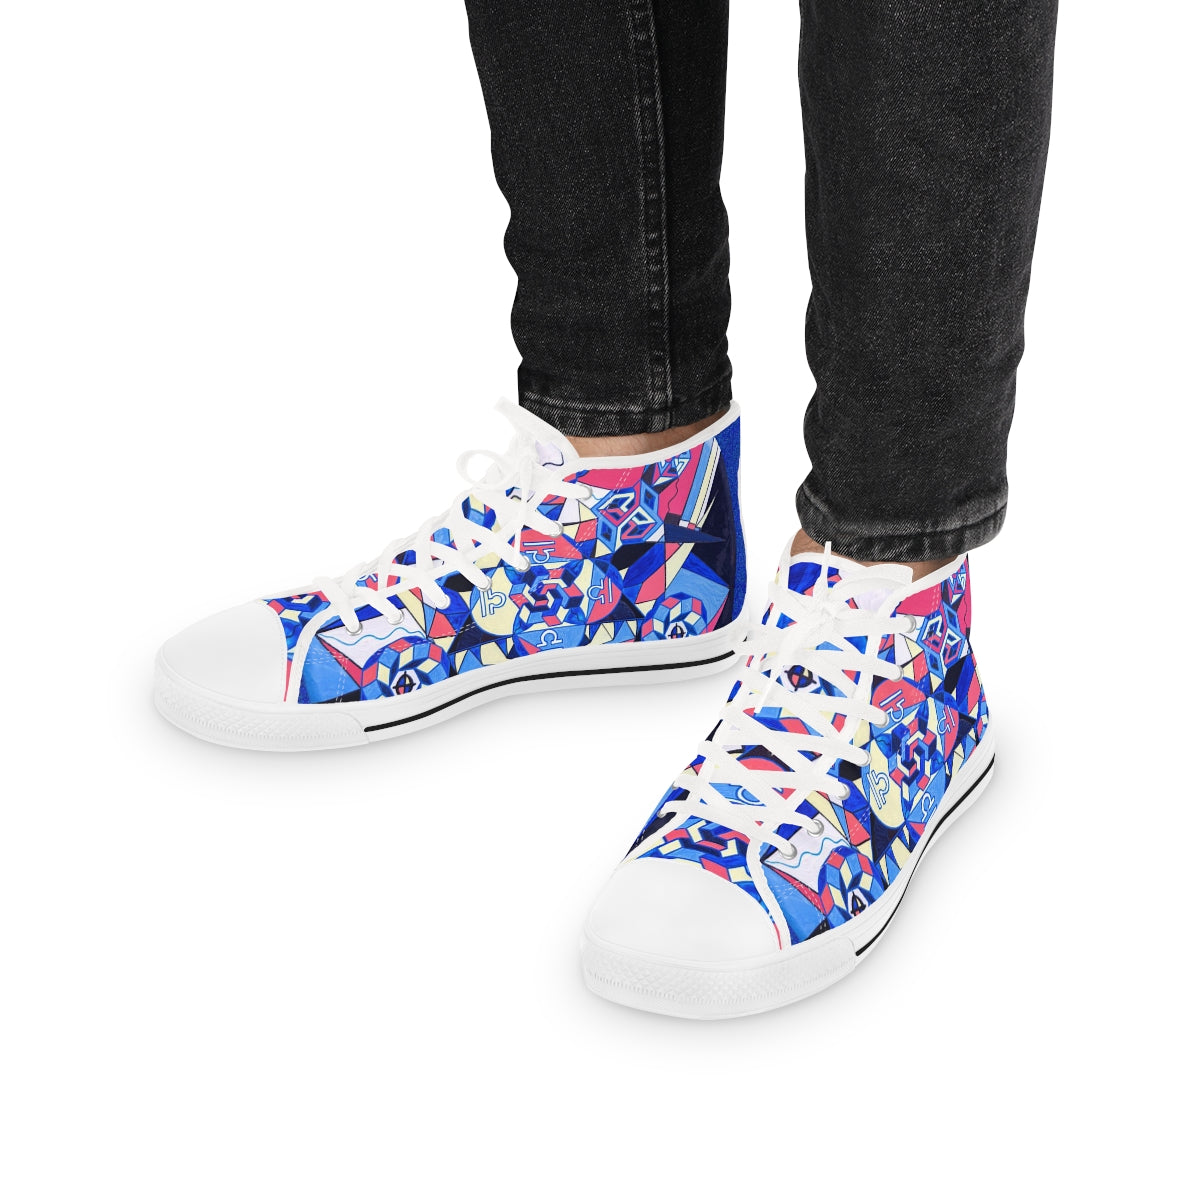 a-place-to-buy-the-right-arrangement-mens-high-top-sneakers-sale_13.jpg